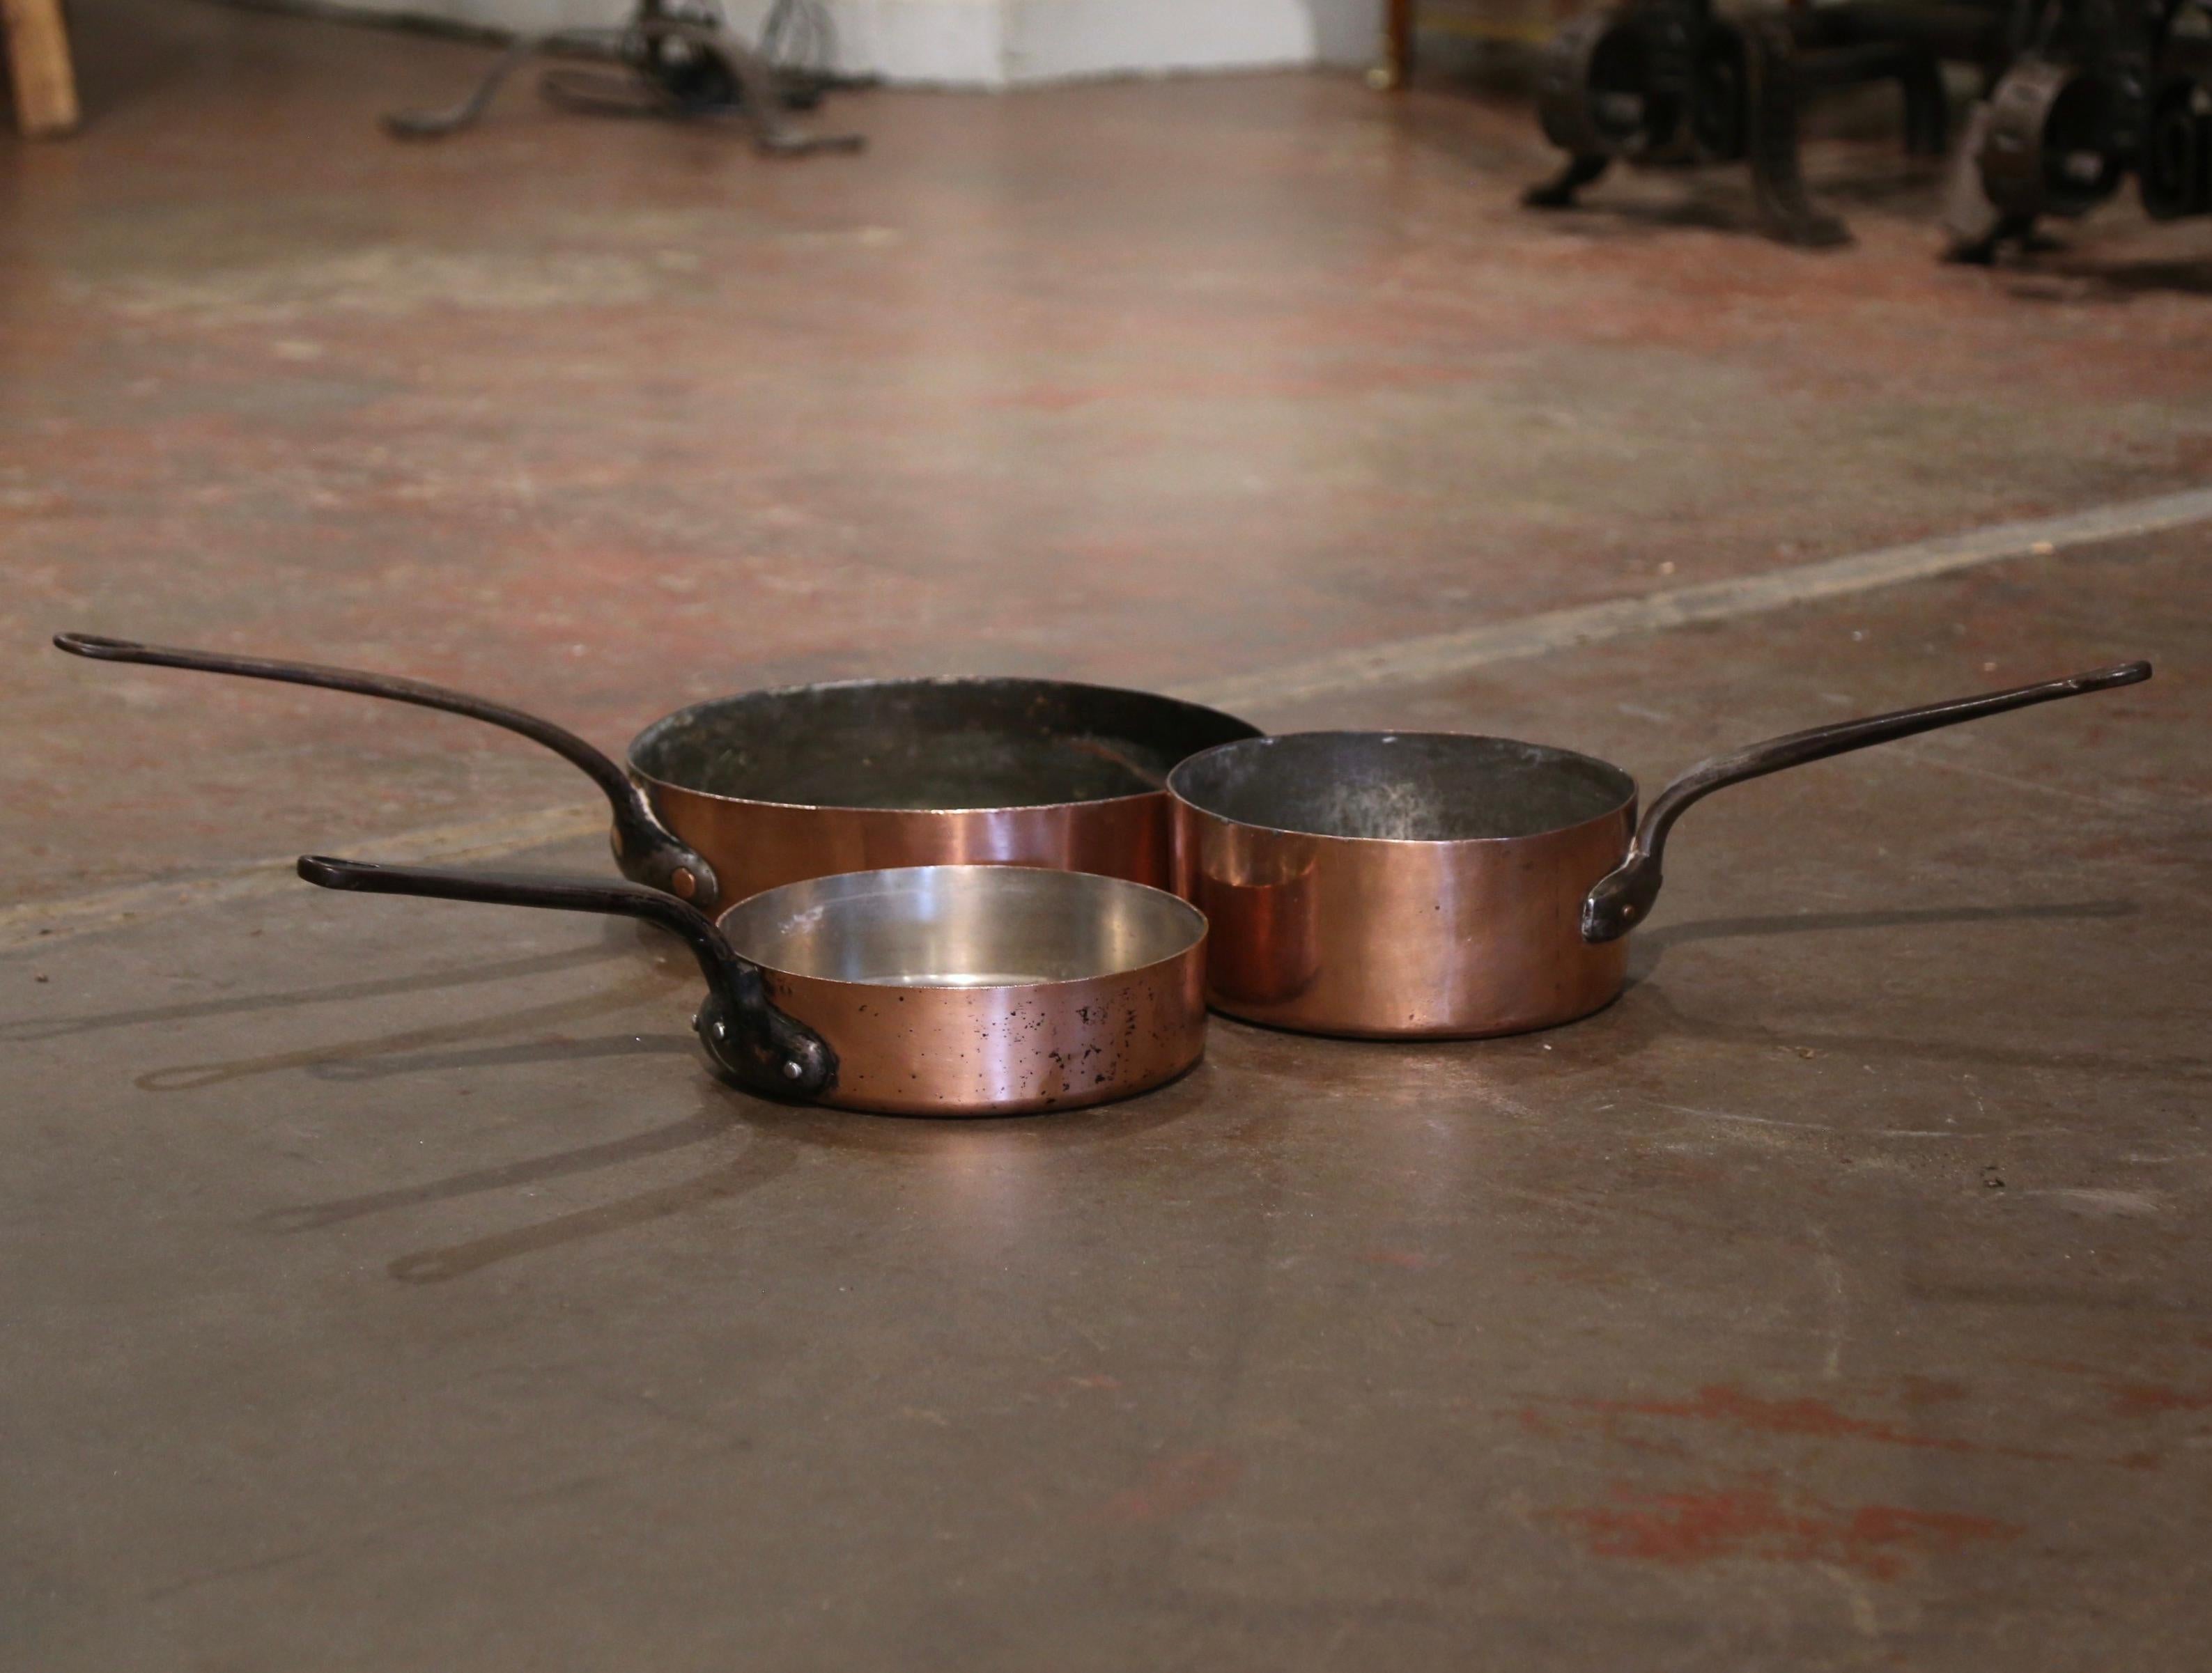 This set of round antique pans, were crafted in France, circa 1860. Made of copper with a large forged iron handle attached with rivets, these country kitchen essentials could still be used for cooking. The pots are in excellent condition, and each